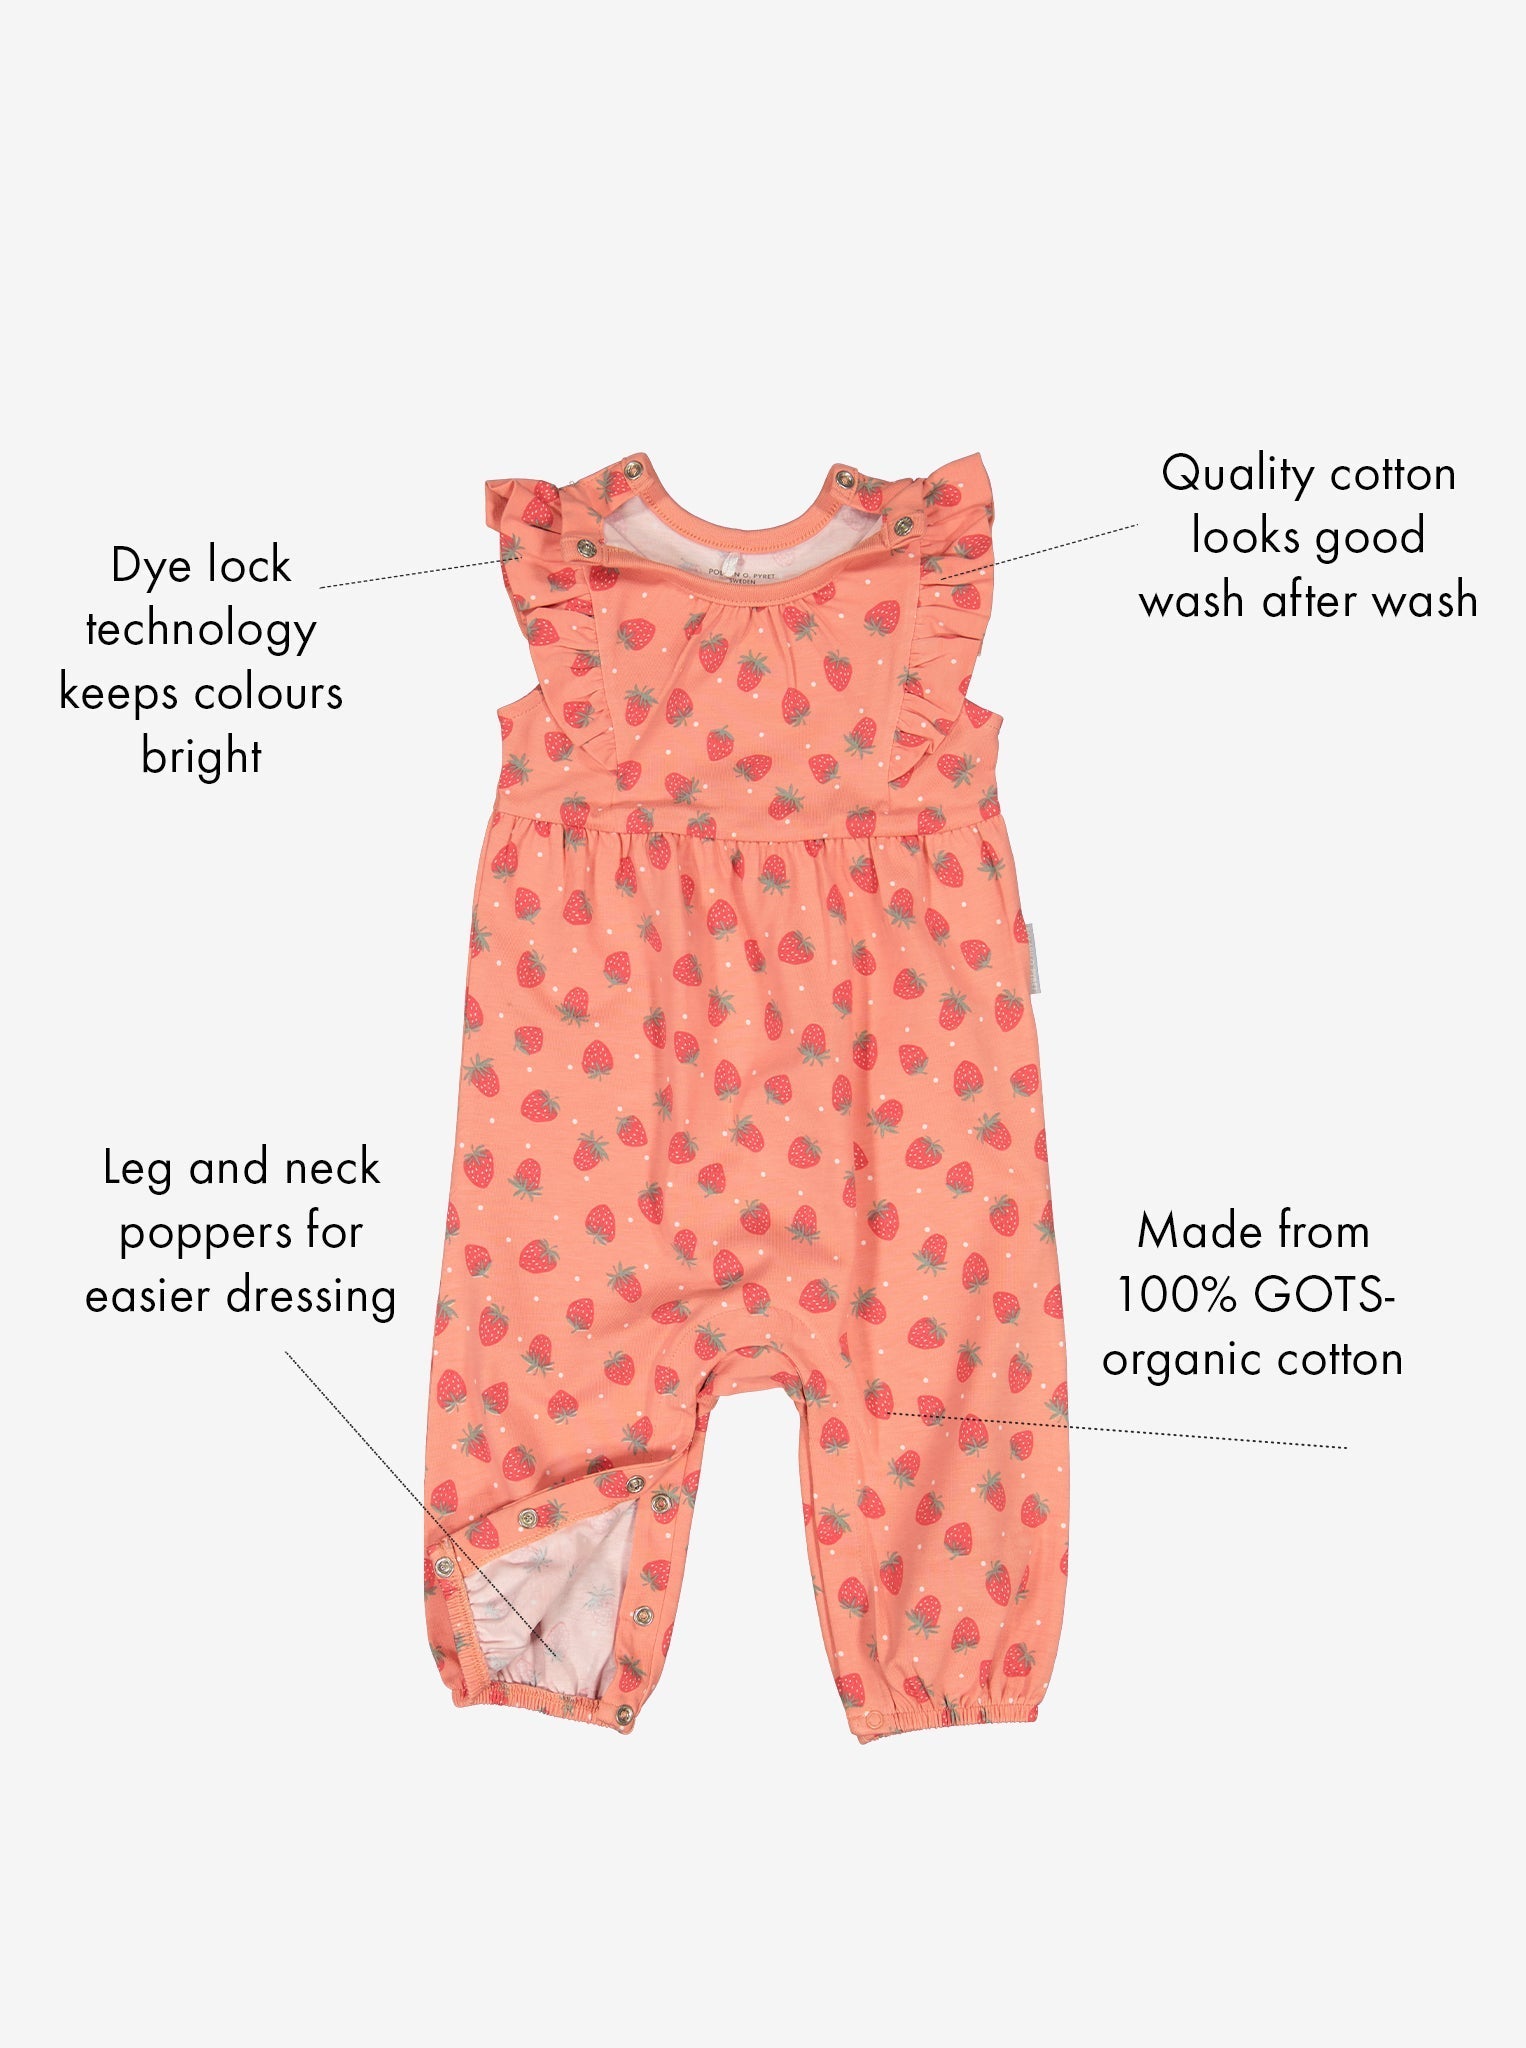 Strawberry Print Baby Playsuit from Polarn O. Pyret Kidswear. Ethically made and sustainably sourced materials.